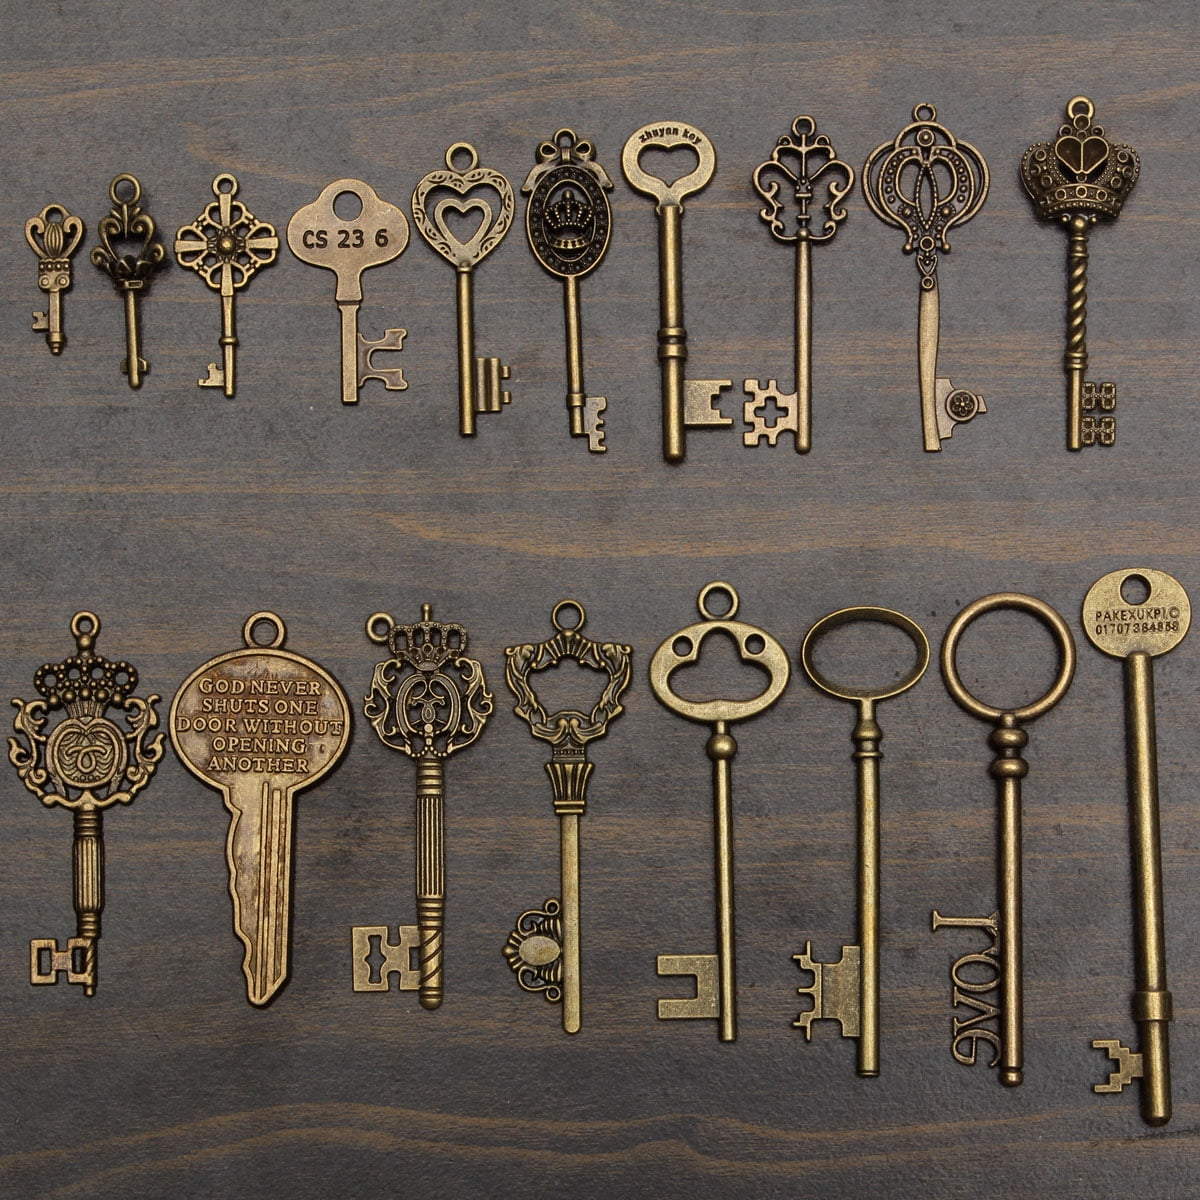 6 Different Styles Vintage 48 Charms Skeleton Key Charm Set in Antique Bronze 